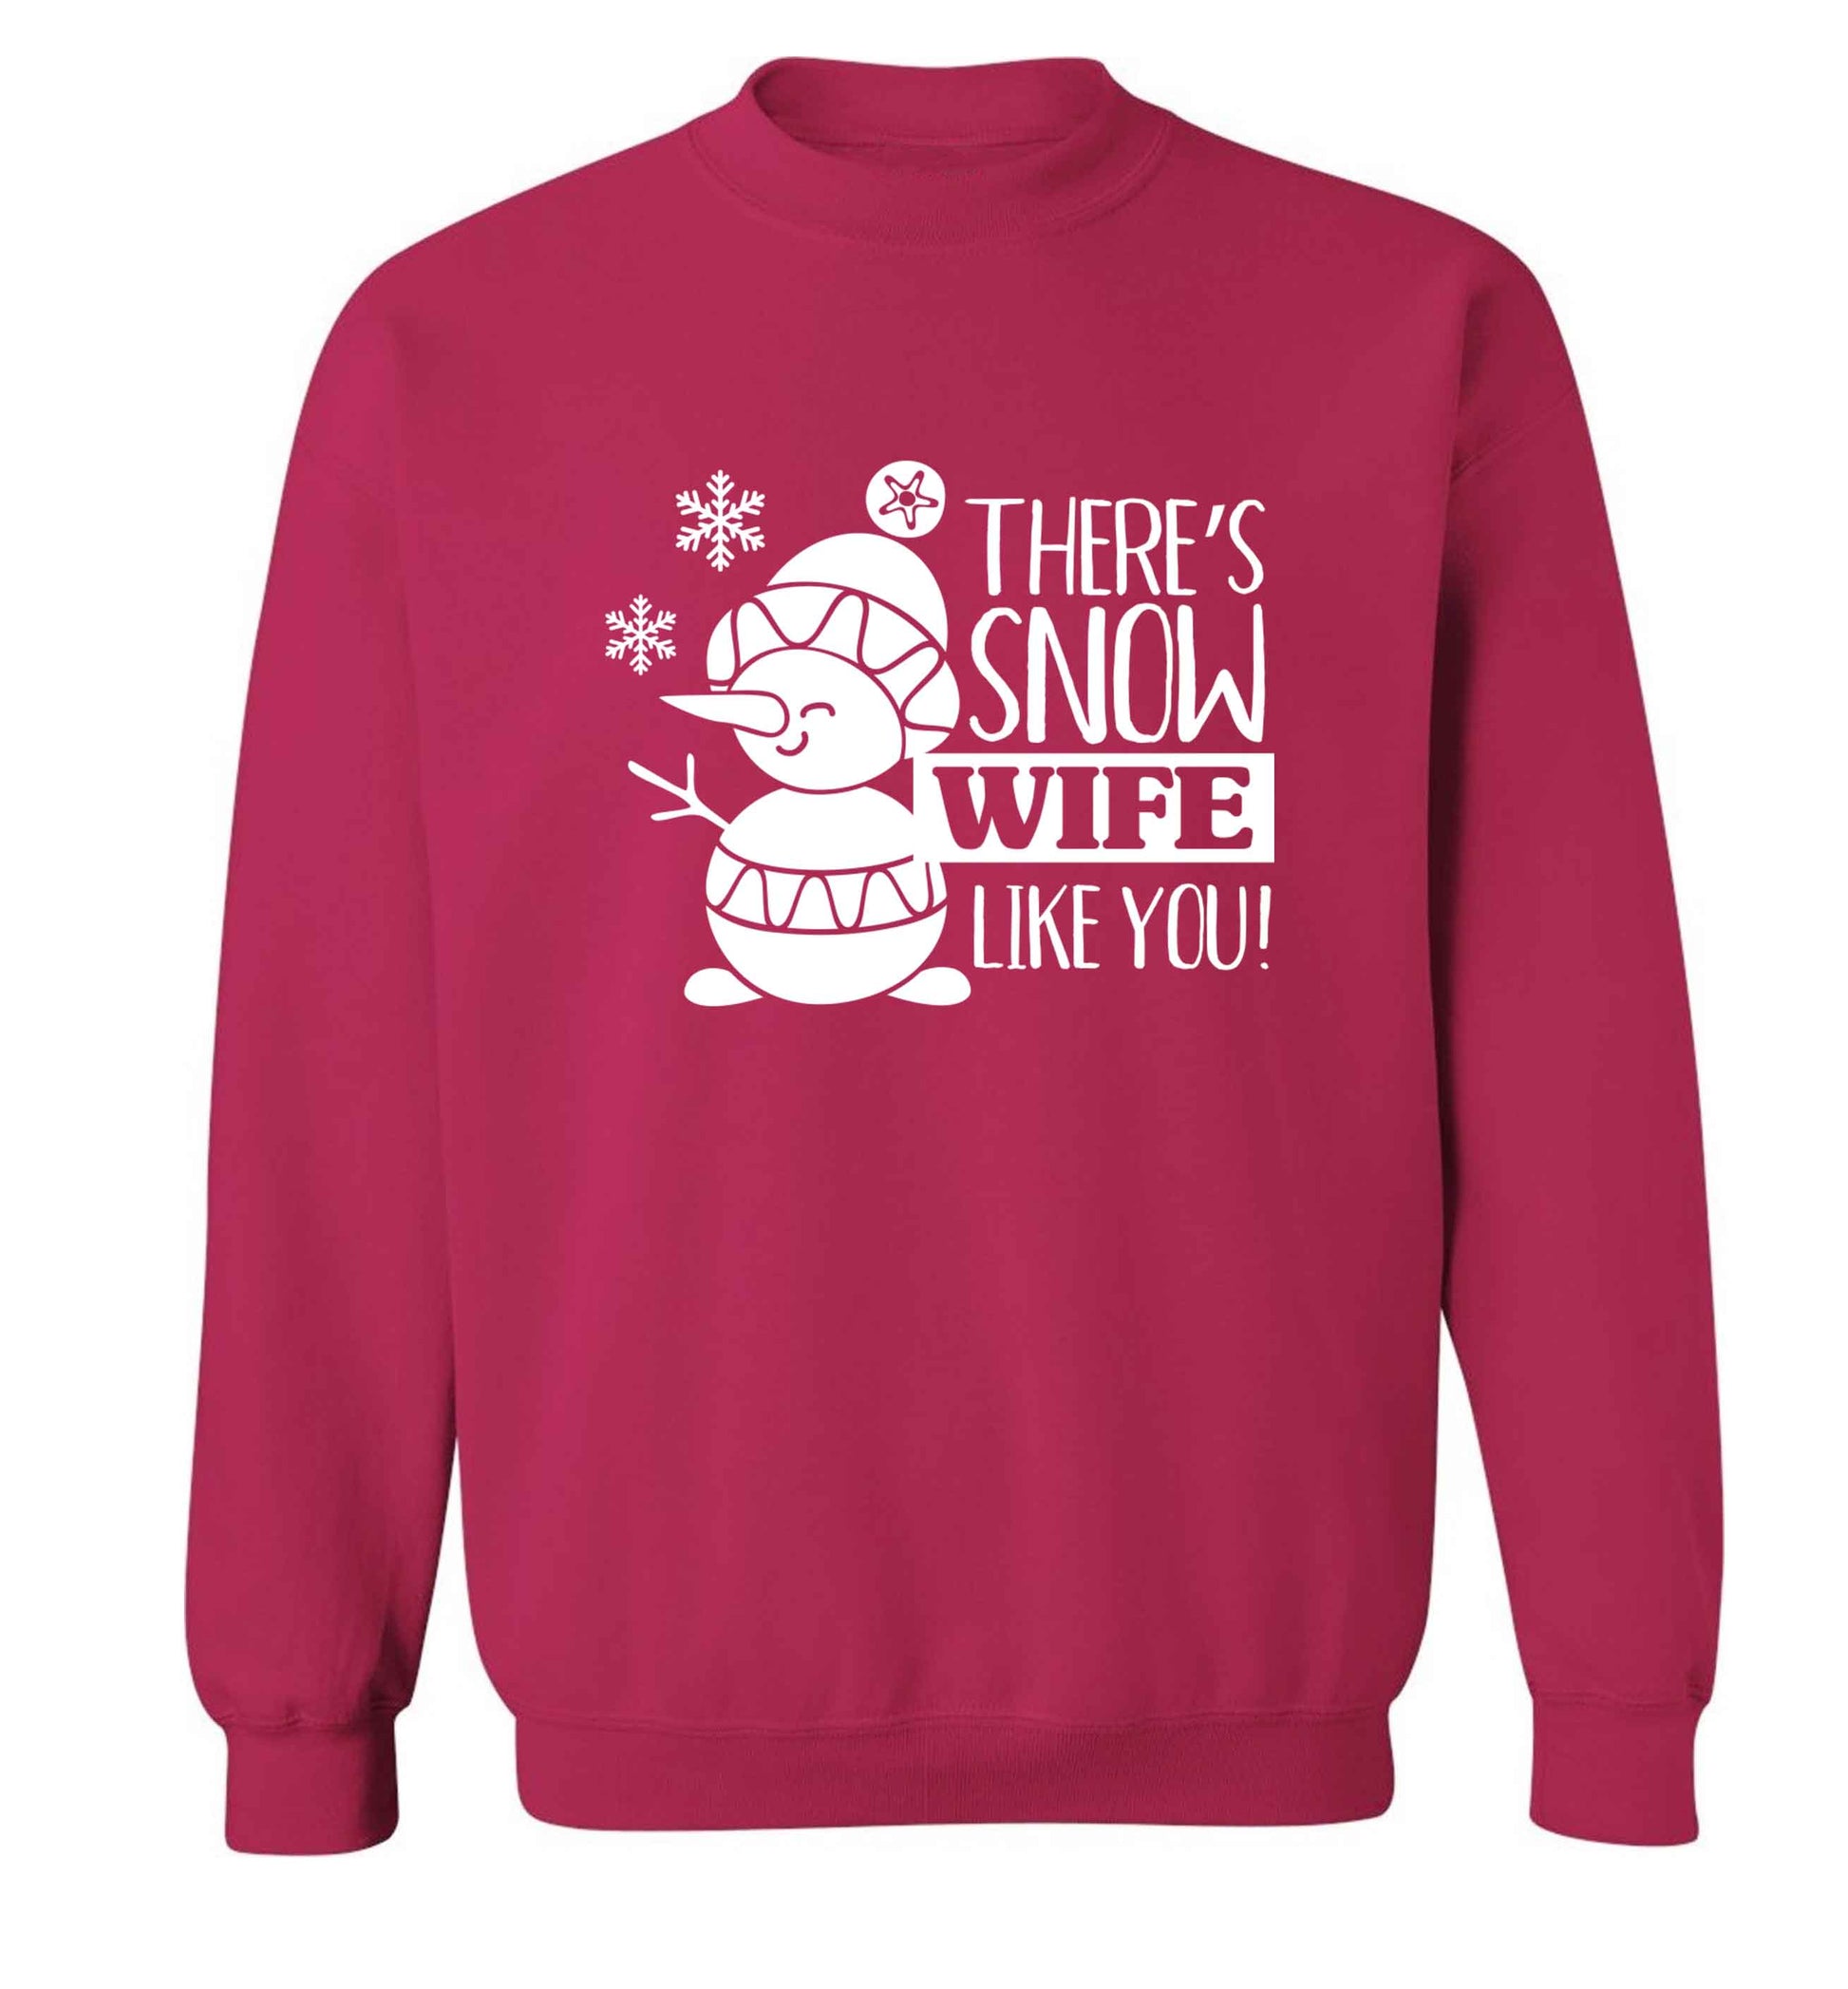 There's snow wife like you adult's unisex pink sweater 2XL